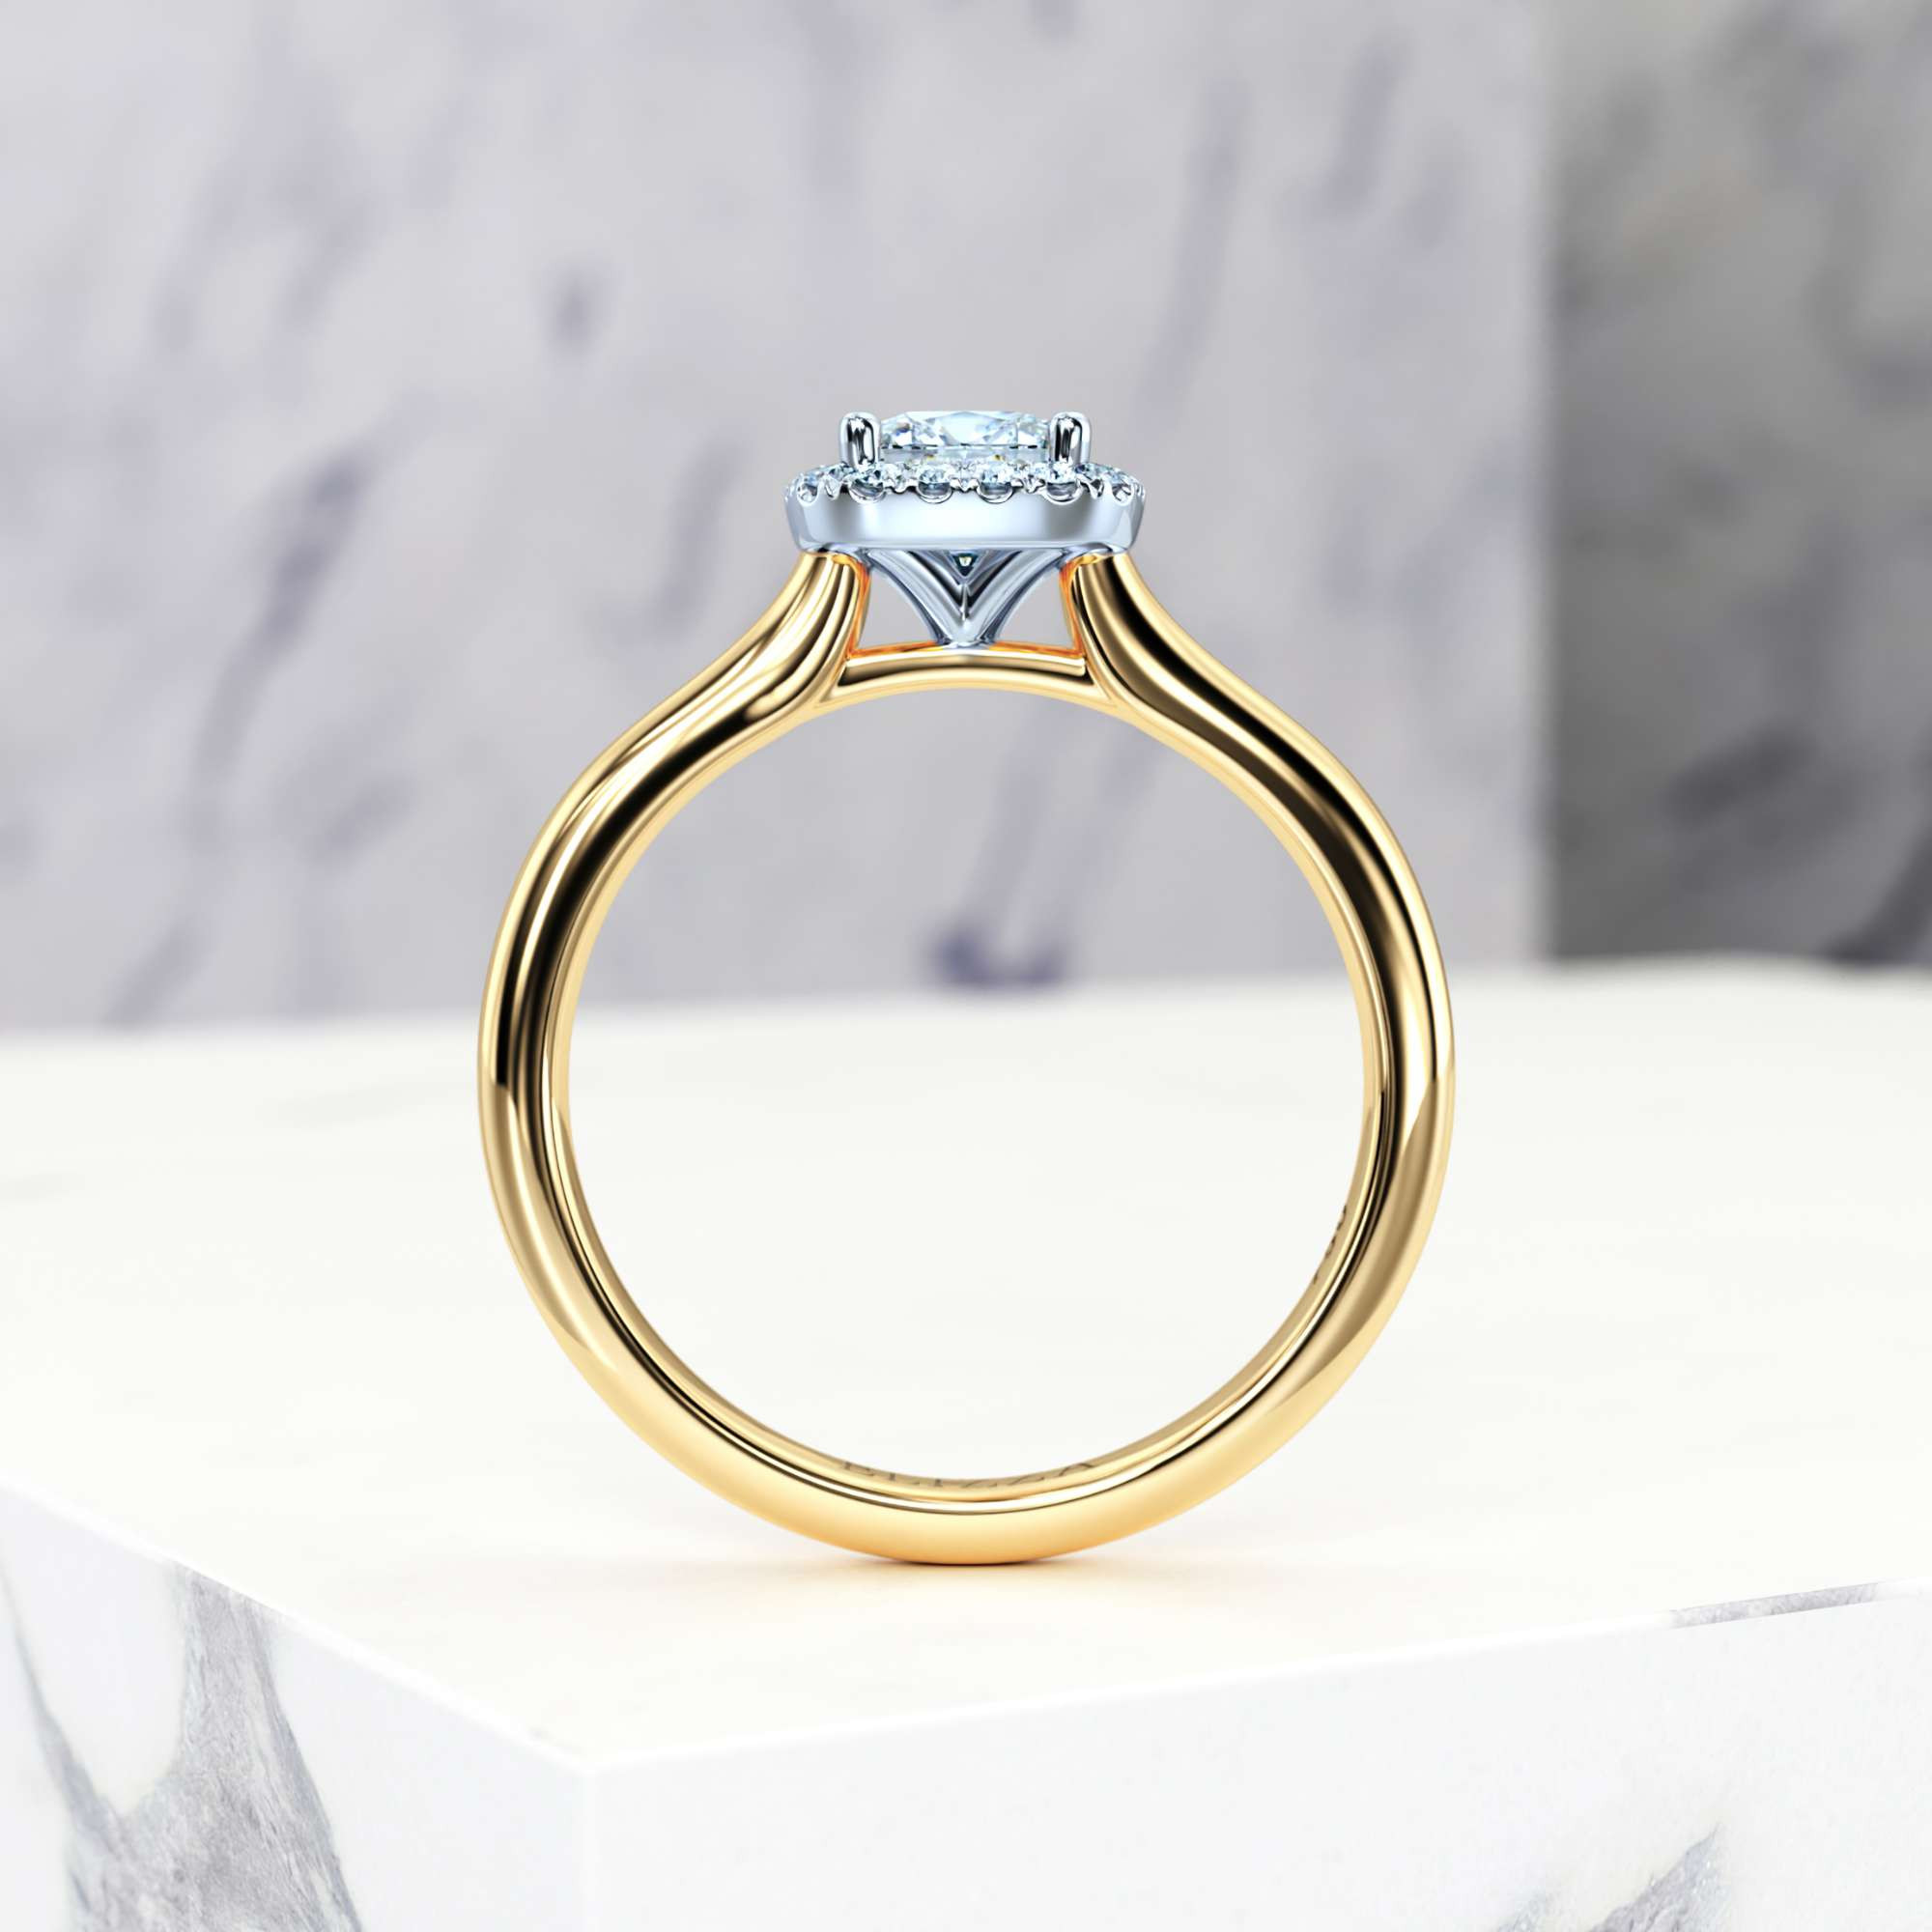 Verlobungsring Effie Square Cushion | Square cushion | 14K Gelb- / Weissgold | Natural | GIA Certified | 0.30ct SI1 H 4